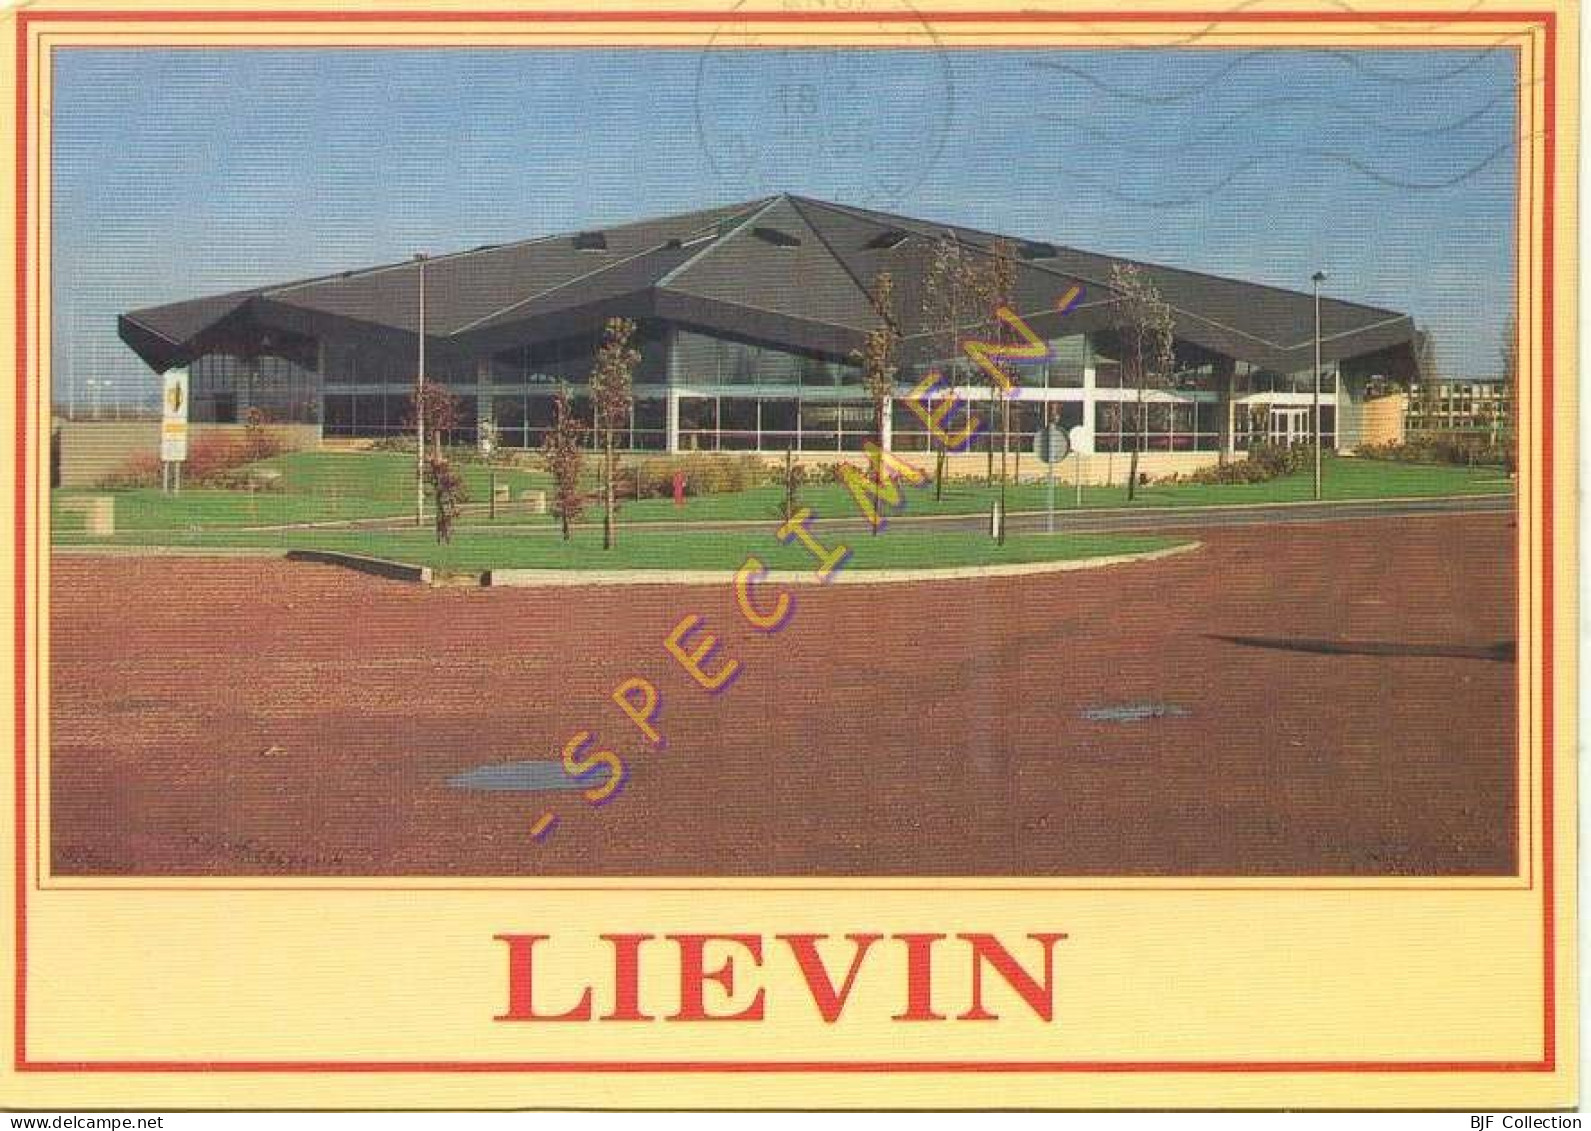 62. LIEVIN – Le Stade - Lievin